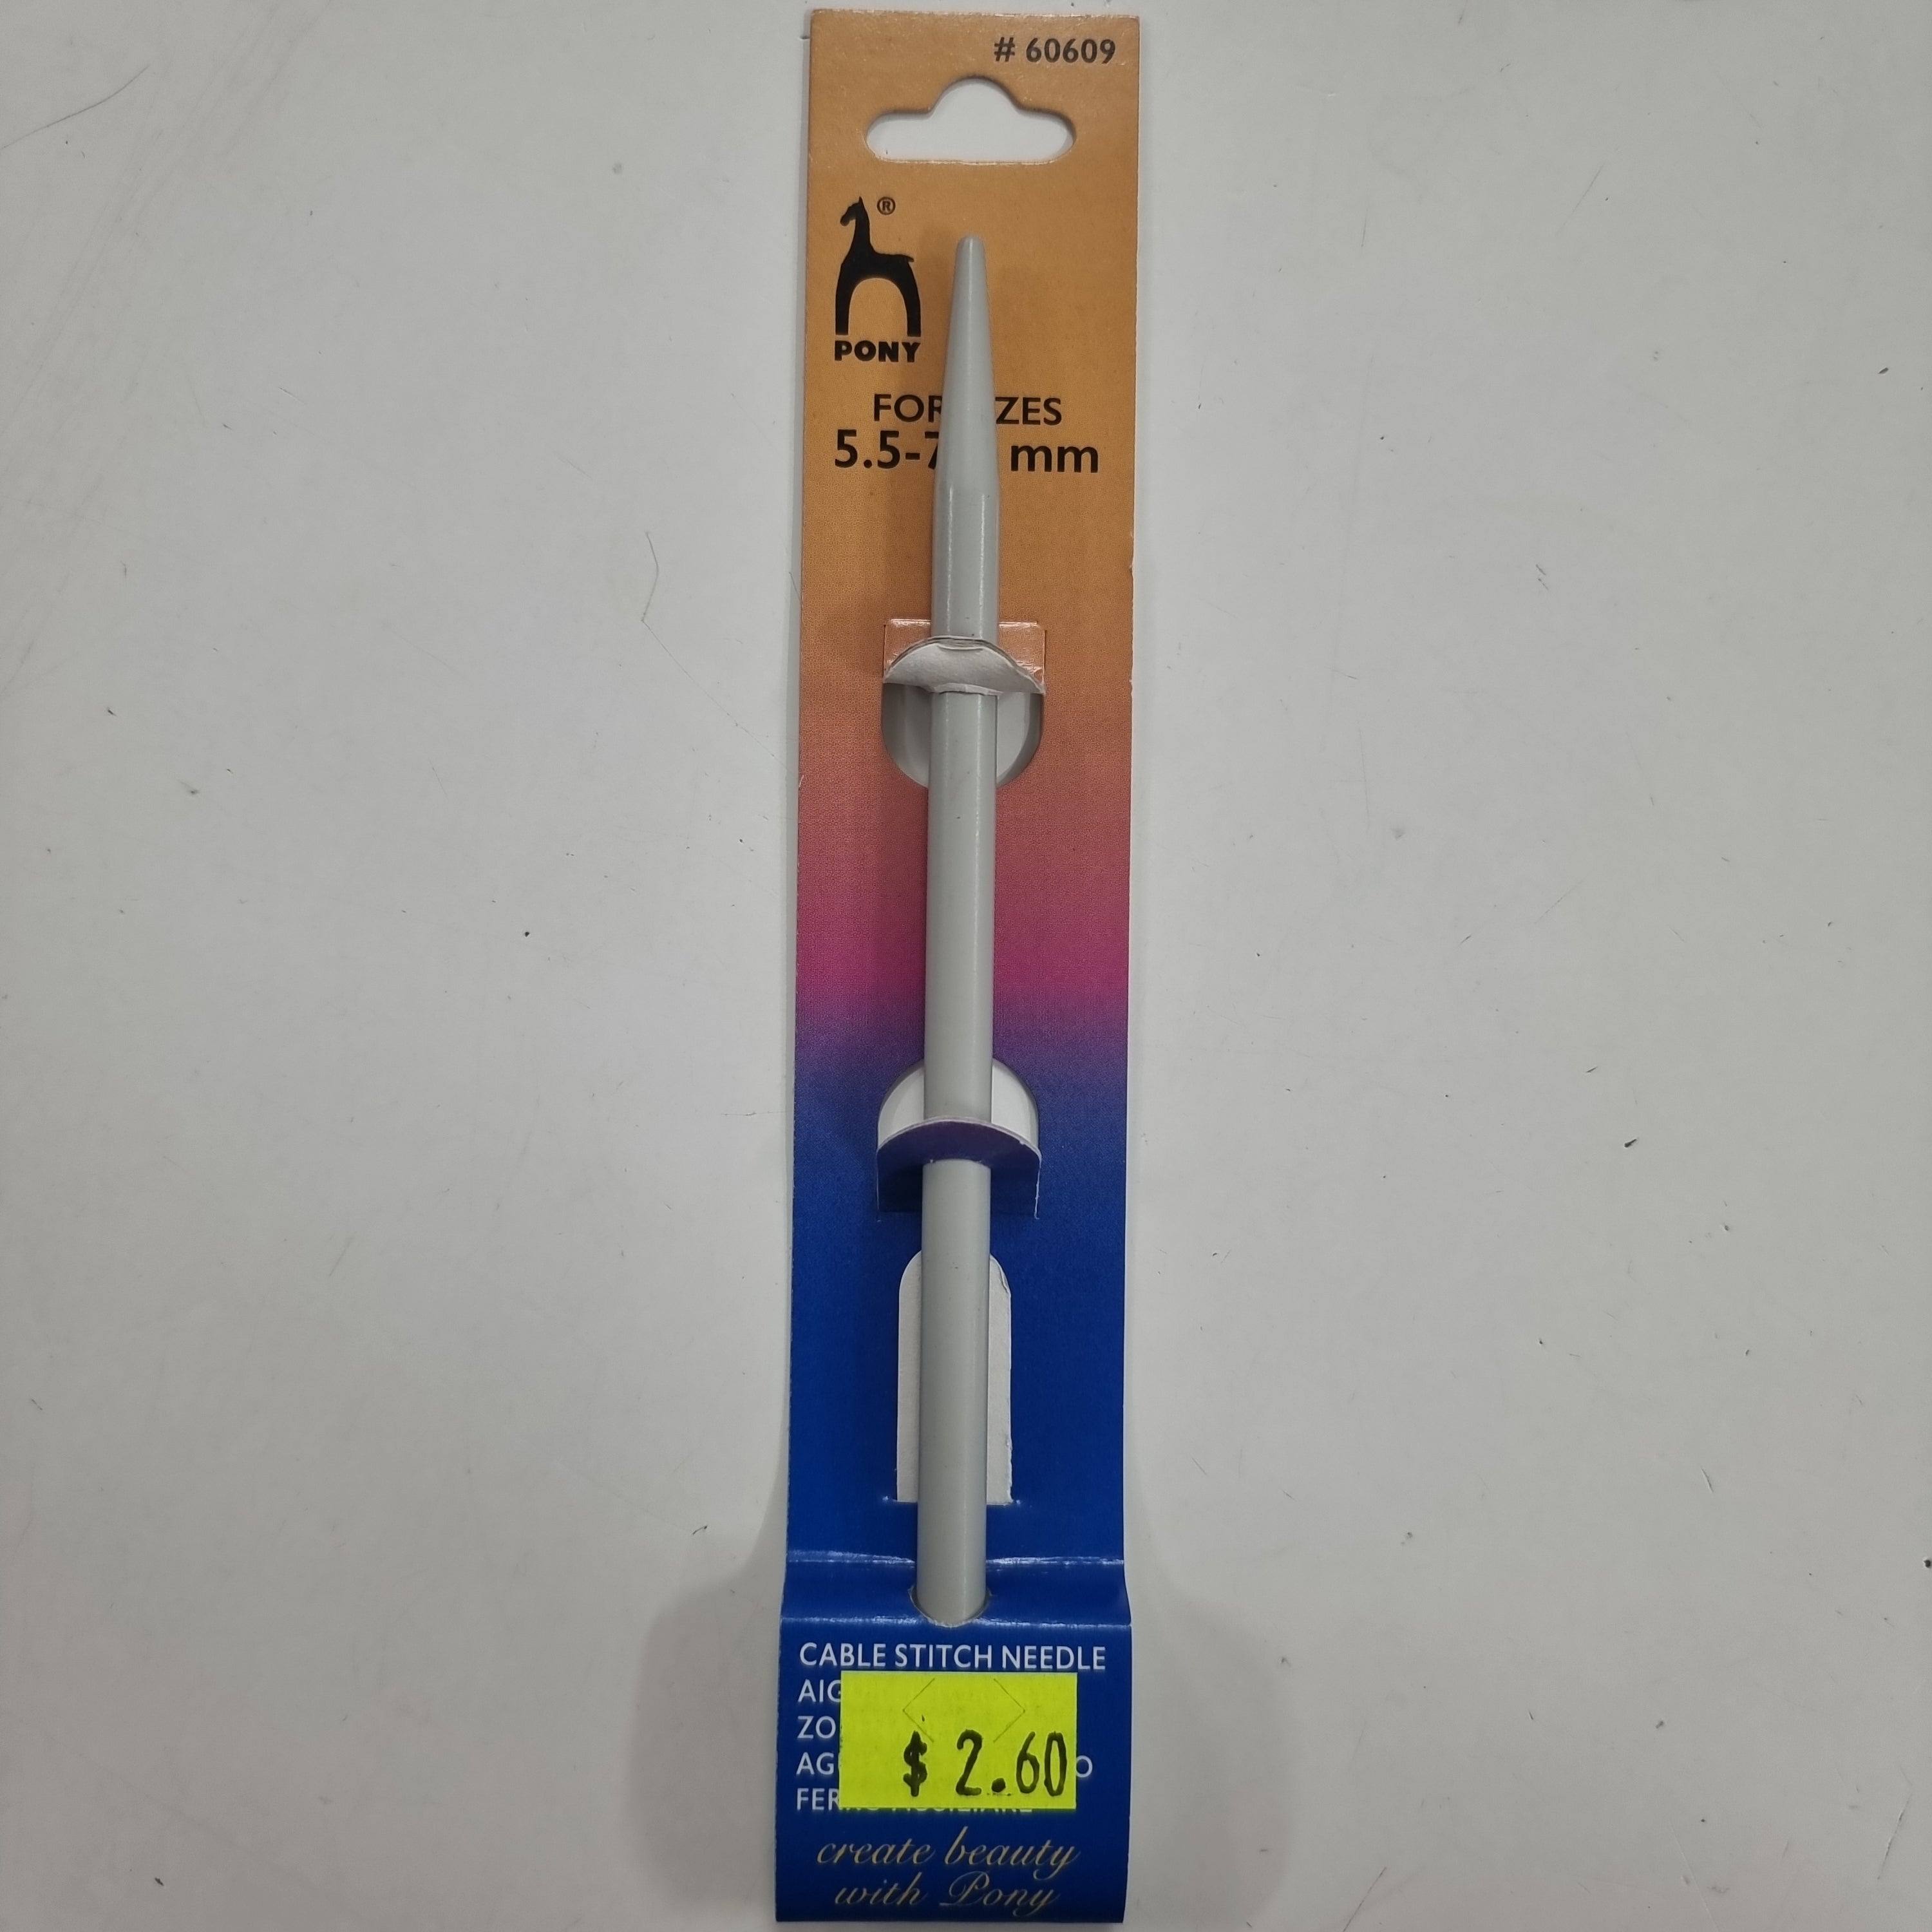 Pony Cable Needle 5.5-7.5mm